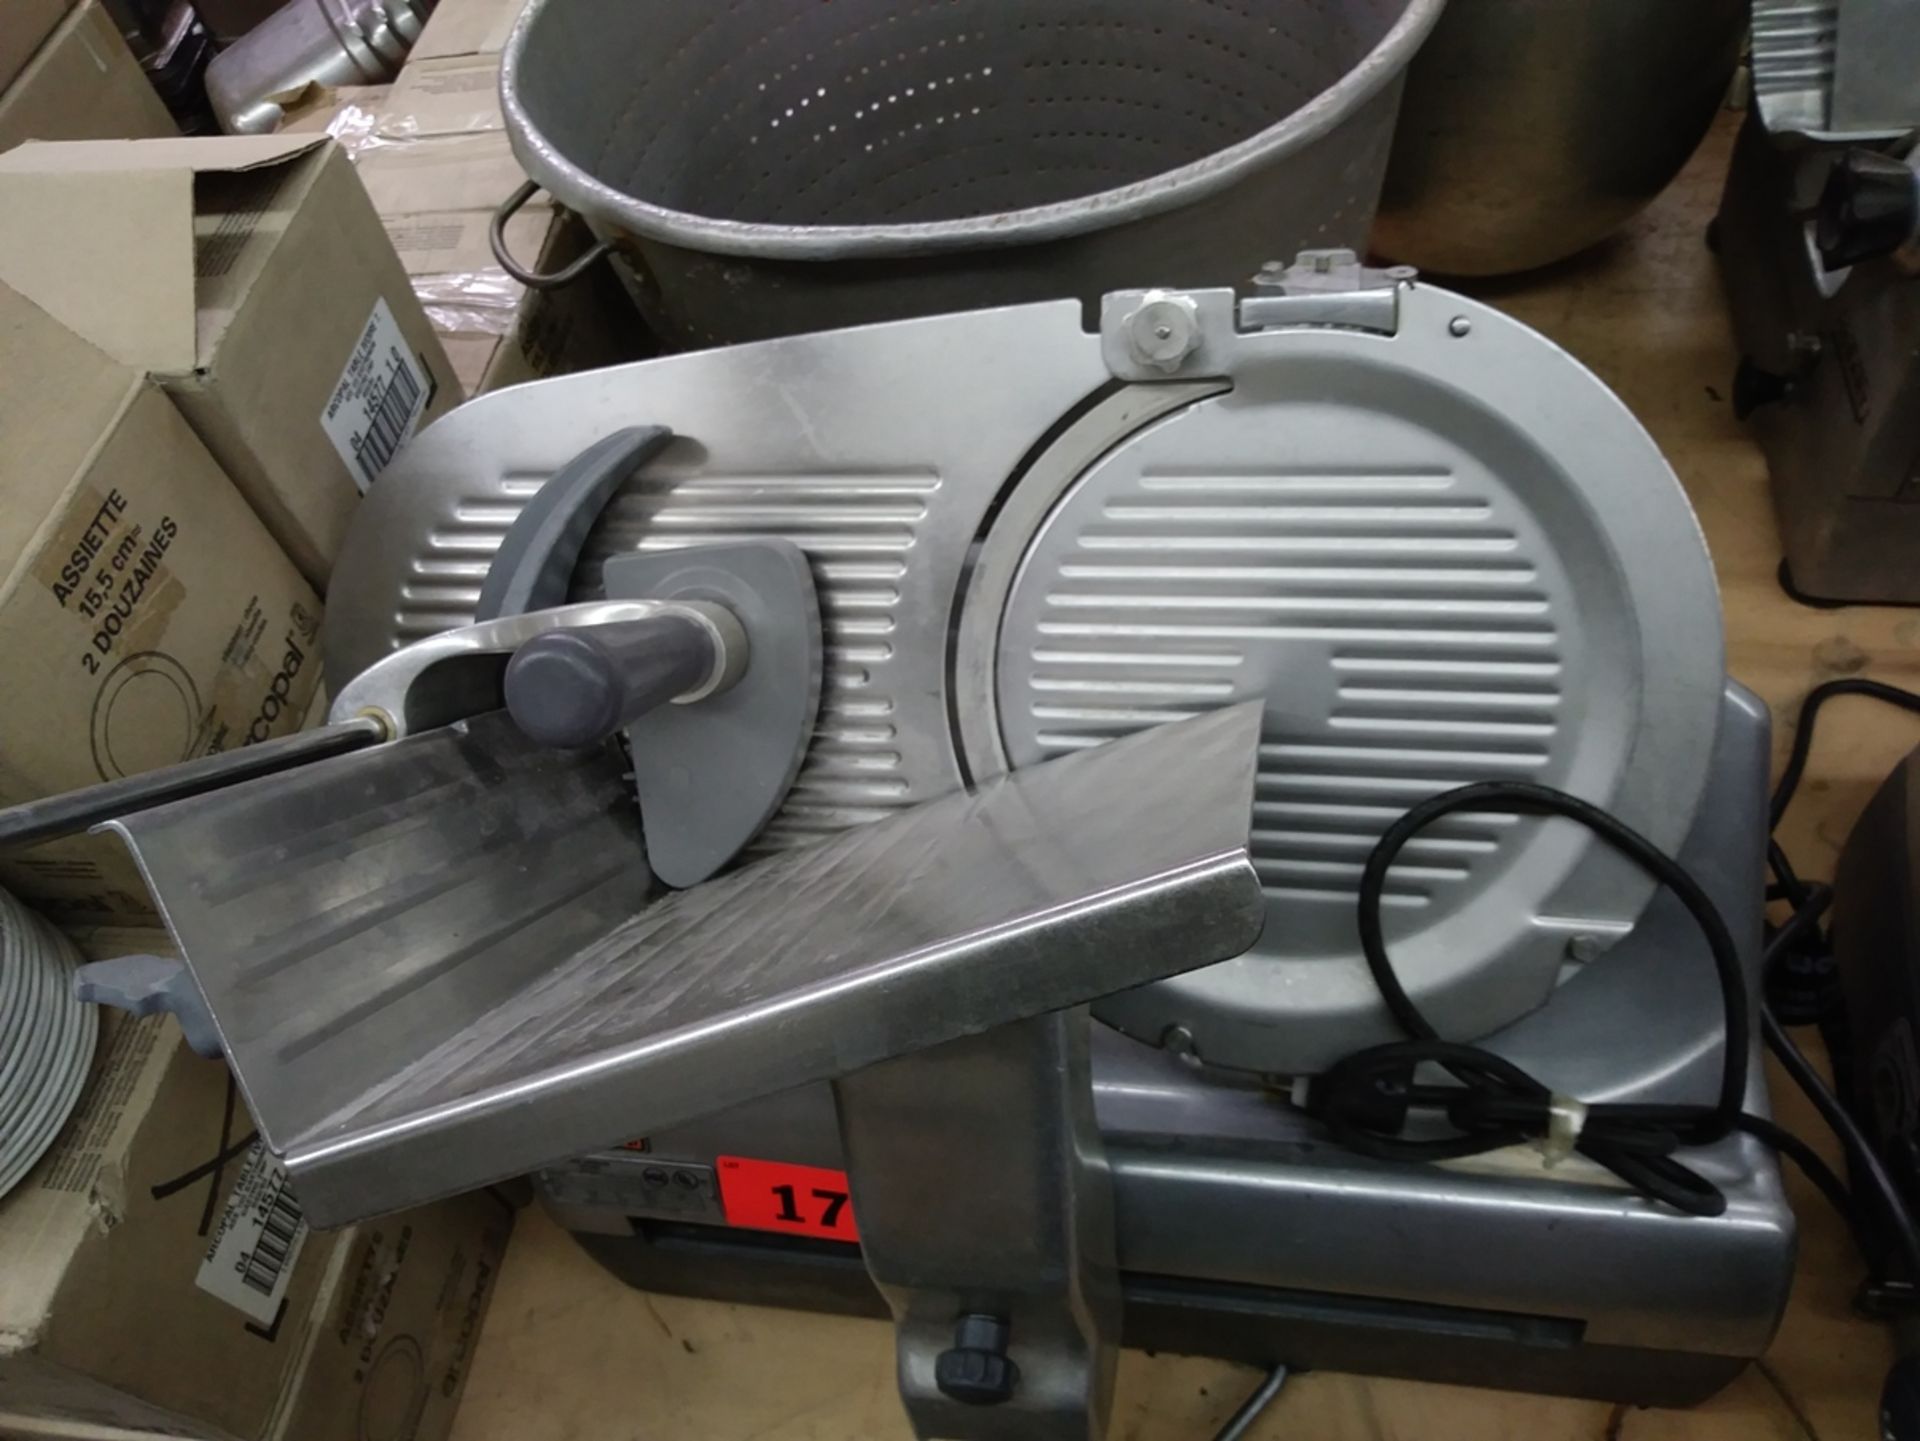 HOBART ELECTRIC MEAT SLICER AUTOMATIC 2712 - Image 3 of 3